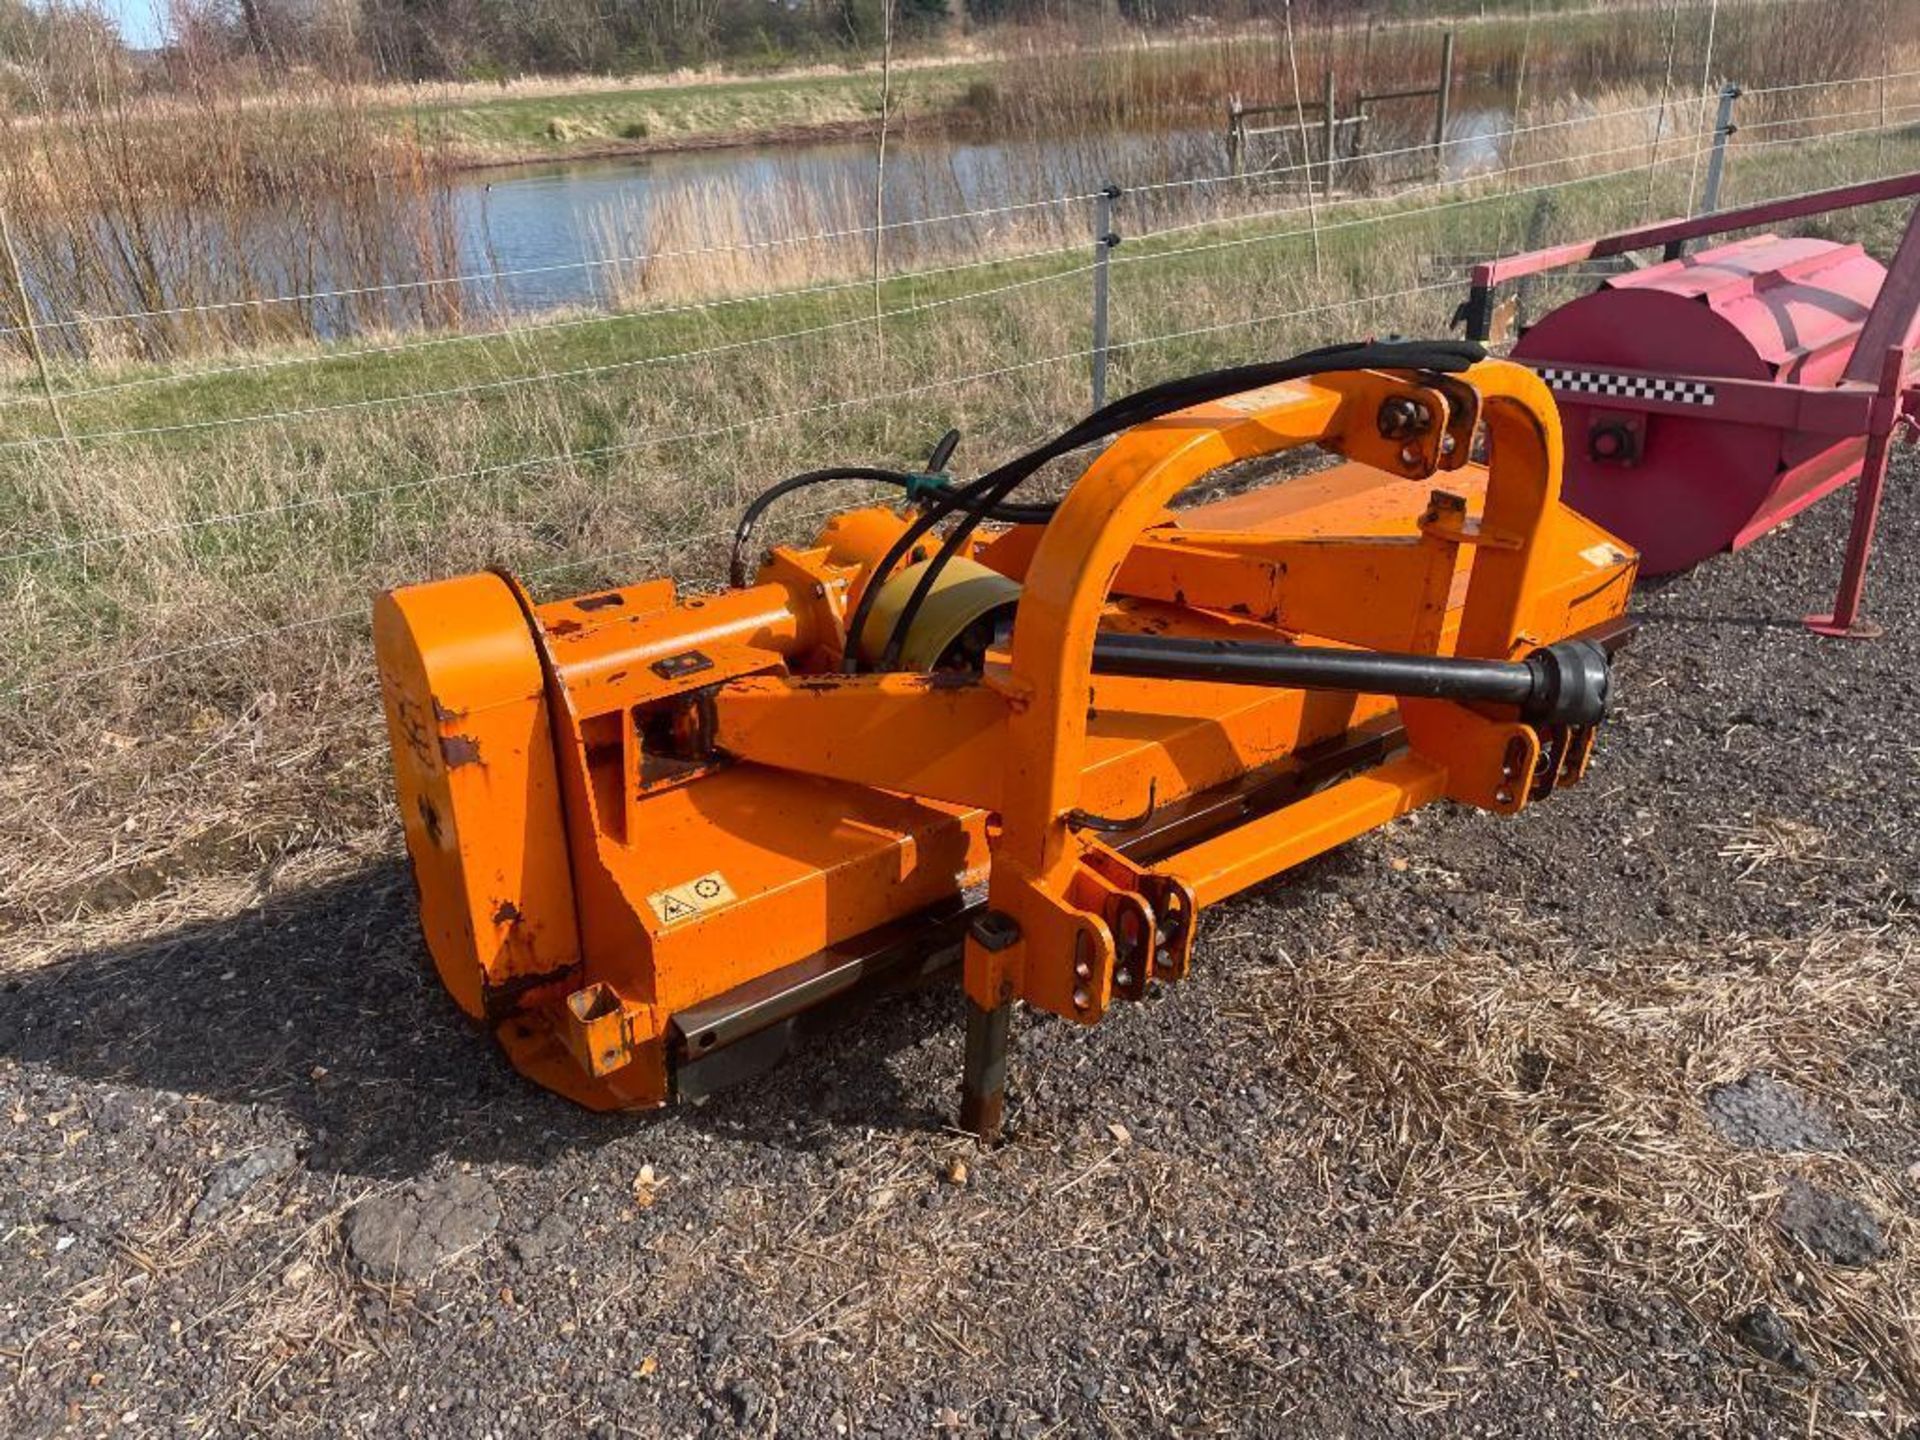 2001 Votex Roadmaster 2306 flail mower, reversible mount, hydraulic side-shift. Serial No: 450622B03 - Image 2 of 7